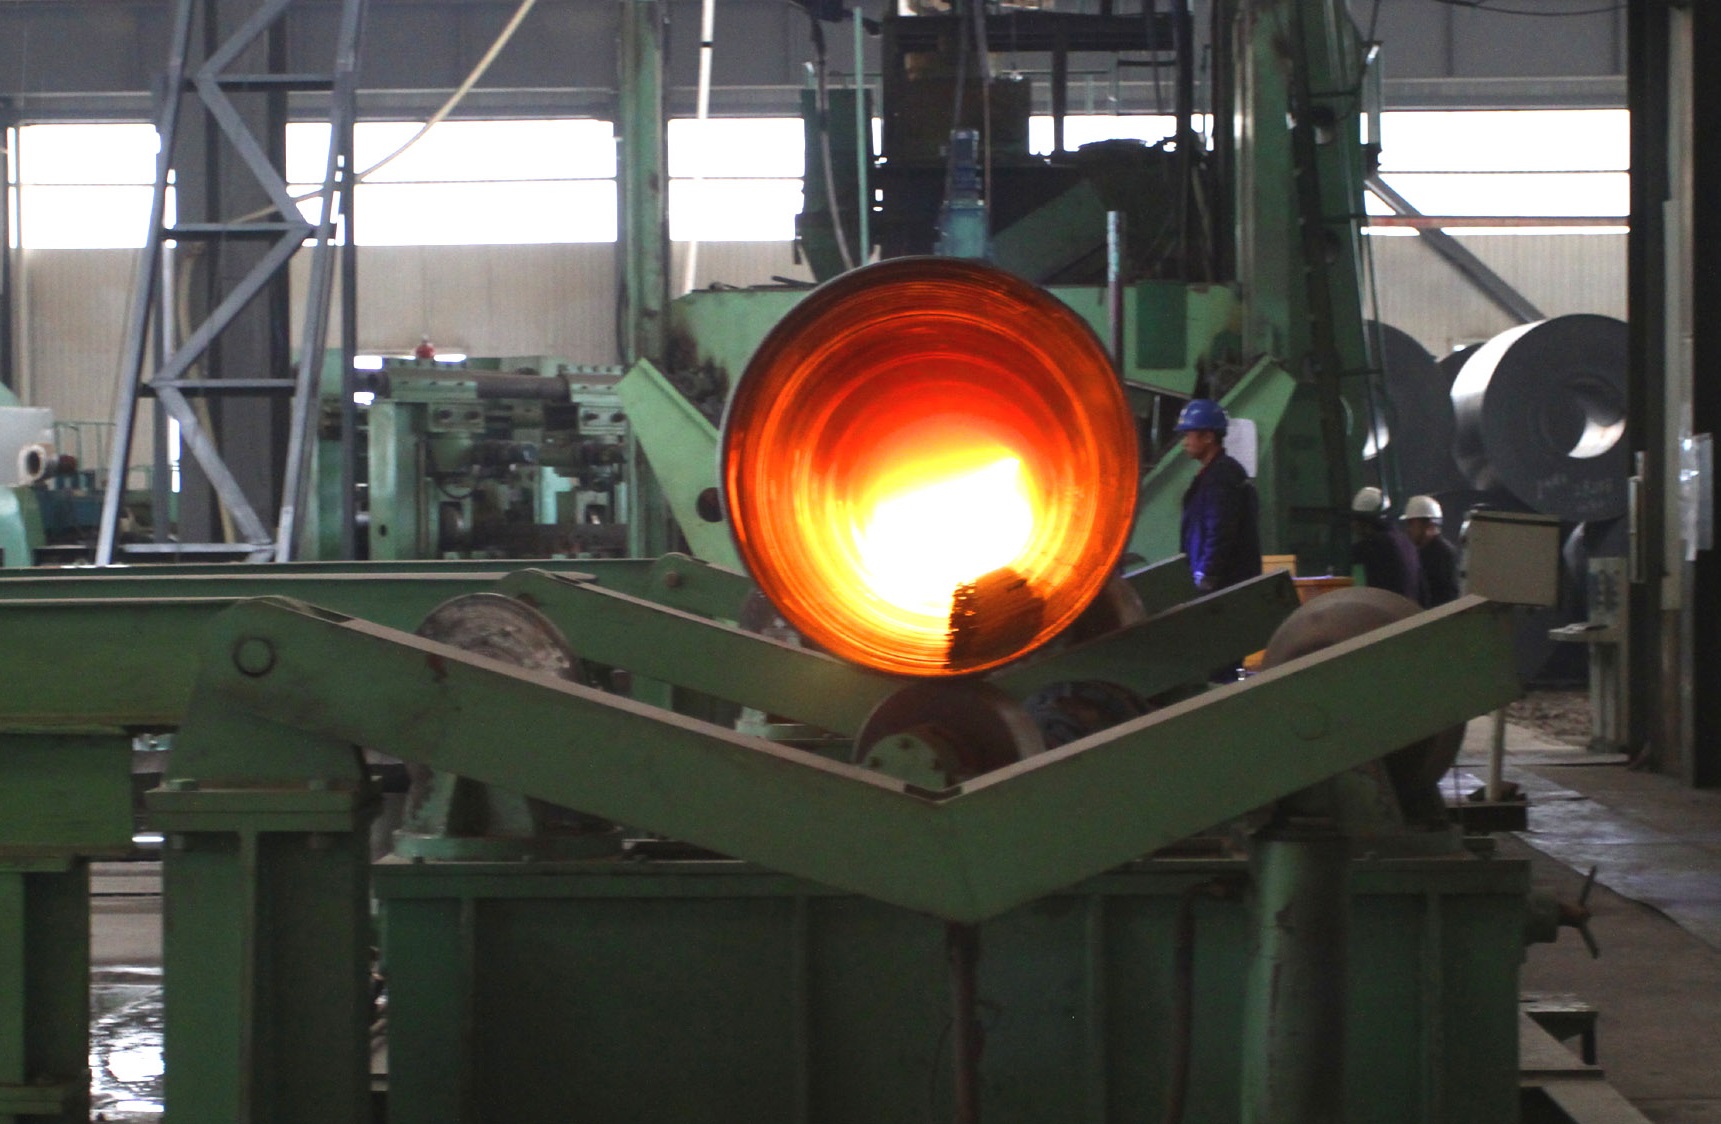 WSAW3000 Spiral Pipe Mill